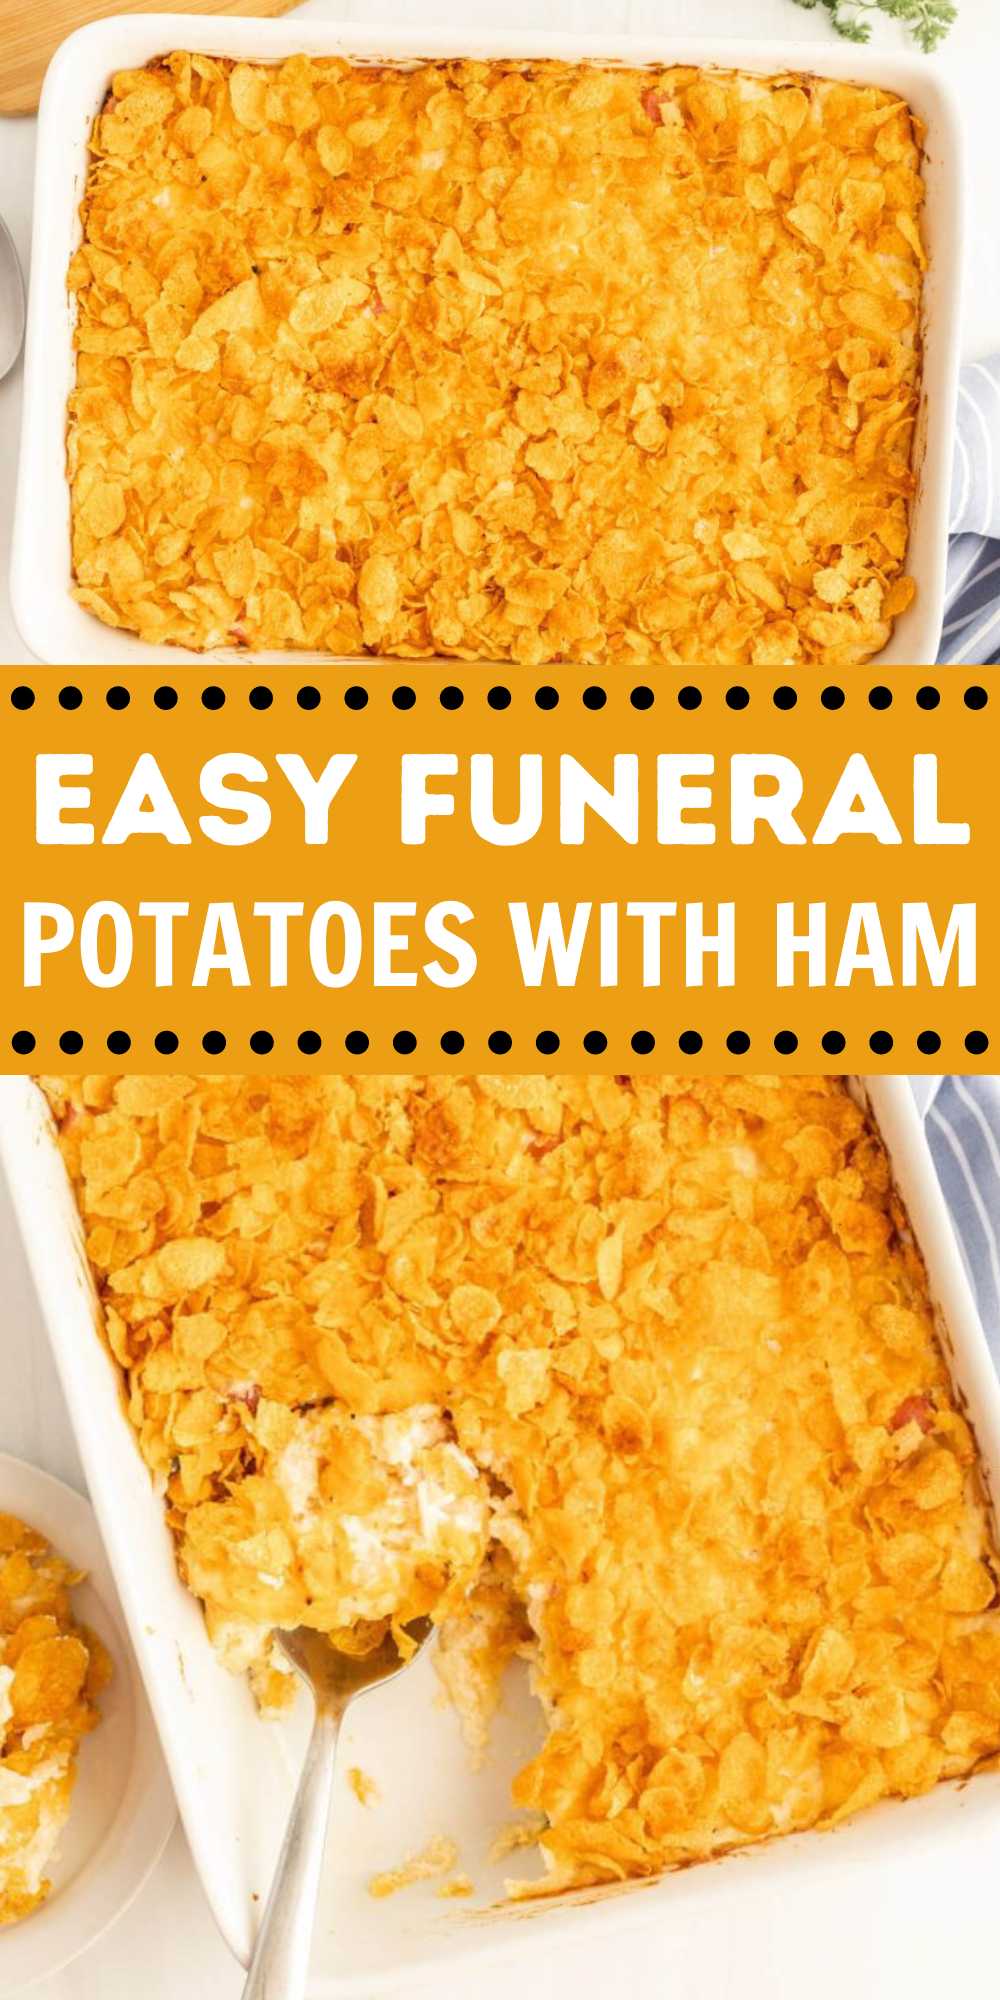 Put a twist on your cheesy potatoes and make Funeral Potatoes with Ham. It is the perfect dish to make for your holiday dinners or luncheons. Adding in the diced ham makes this casserole dish hearty and delicious. Great way to use leftover ham from Easter. If you are looking for a crowd pleasing potato casserole, make this recipe. #eatingonadime #funeralpotatoeswithham #funeralpotatoes